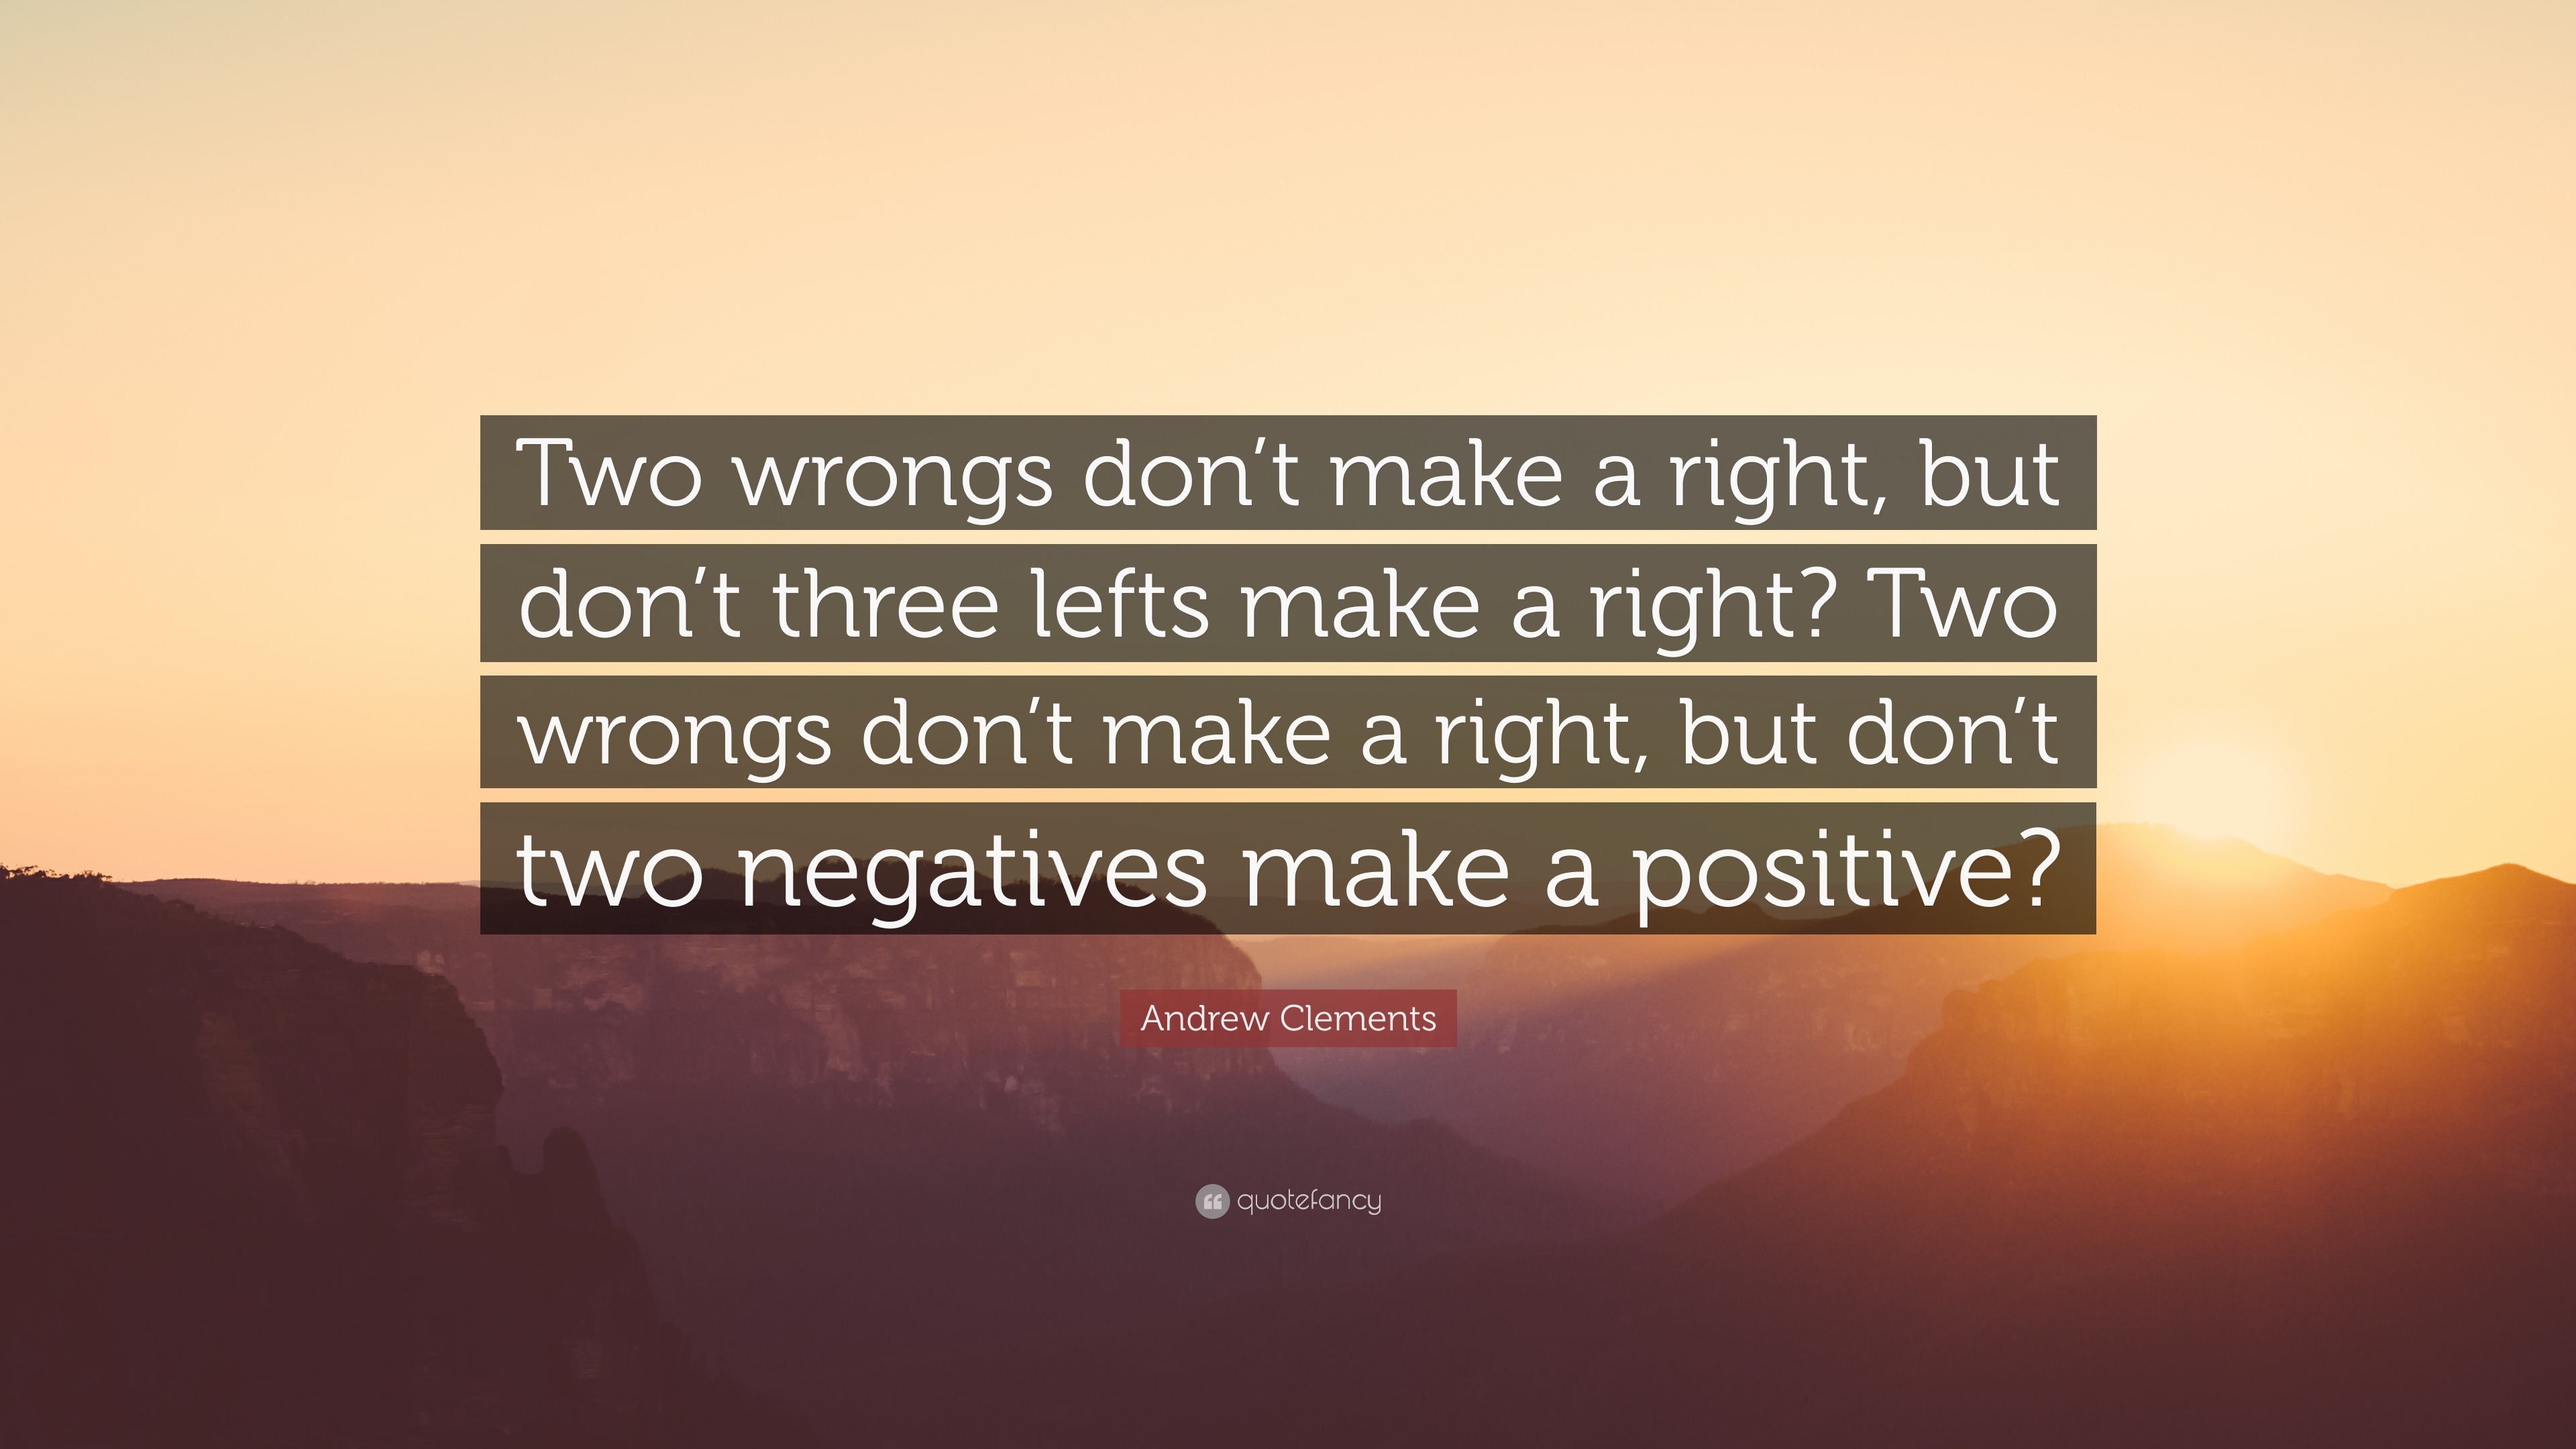 Andrew Clements Quote Two Wrongs Don T Make A Right But Don T Three Lefts Make A Right Two Wrongs Don T Make A Right But Don T Two Negative